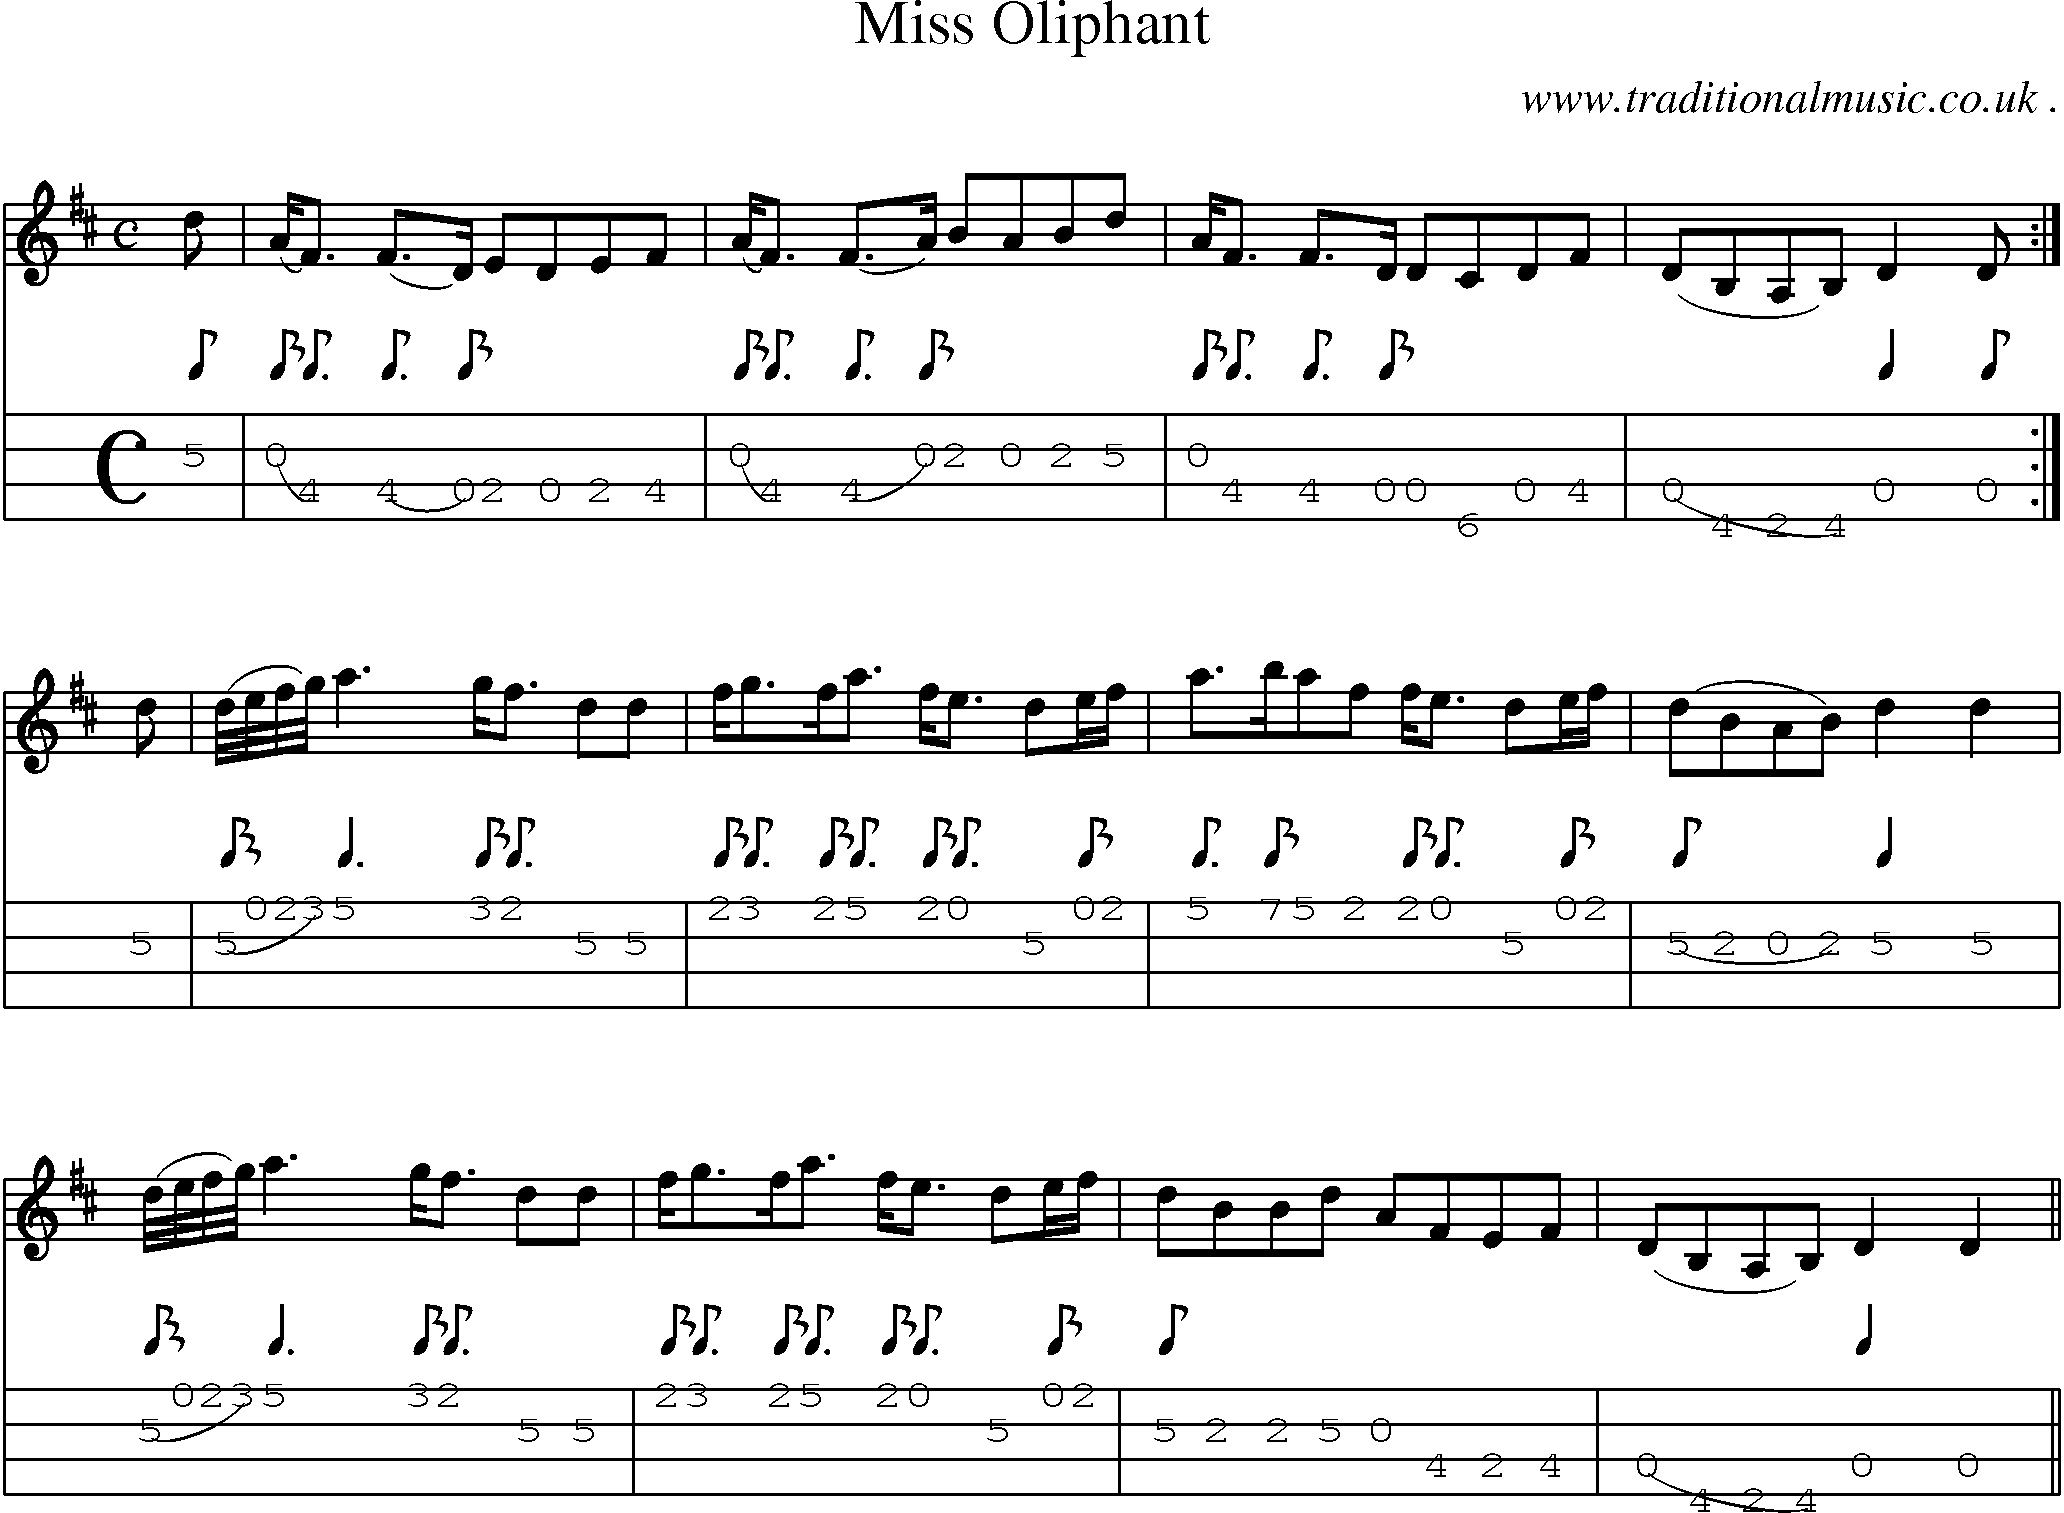 Sheet-music  score, Chords and Mandolin Tabs for Miss Oliphant